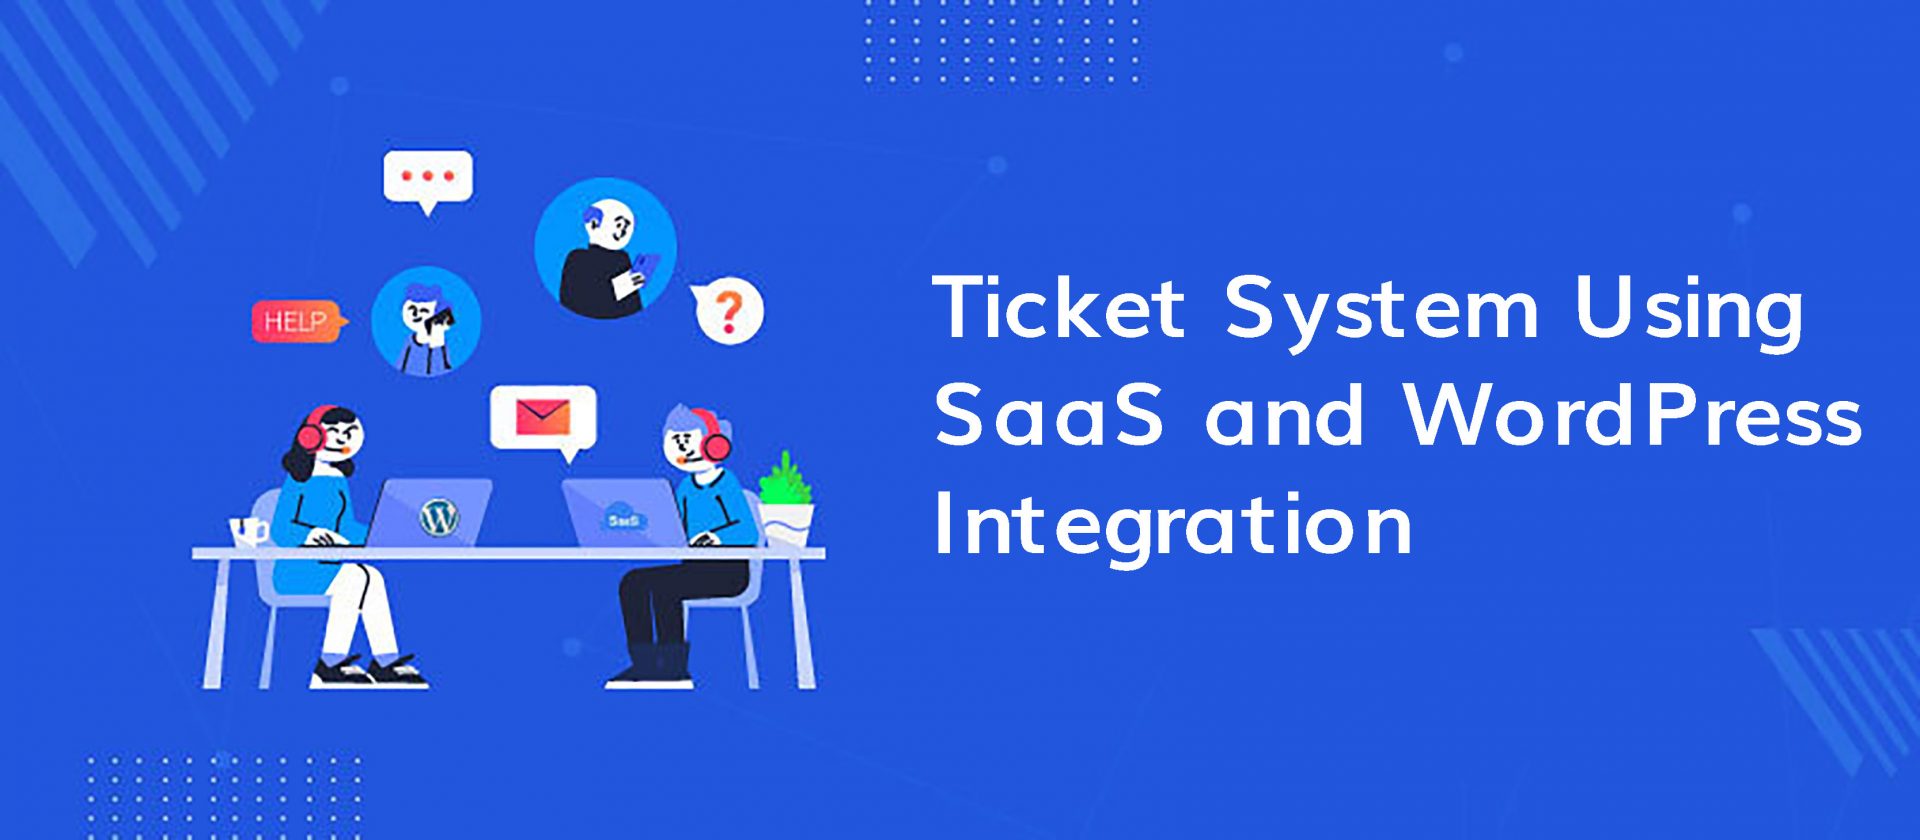 Ticket-System-Using-SaaS-and-WordPress-Integration